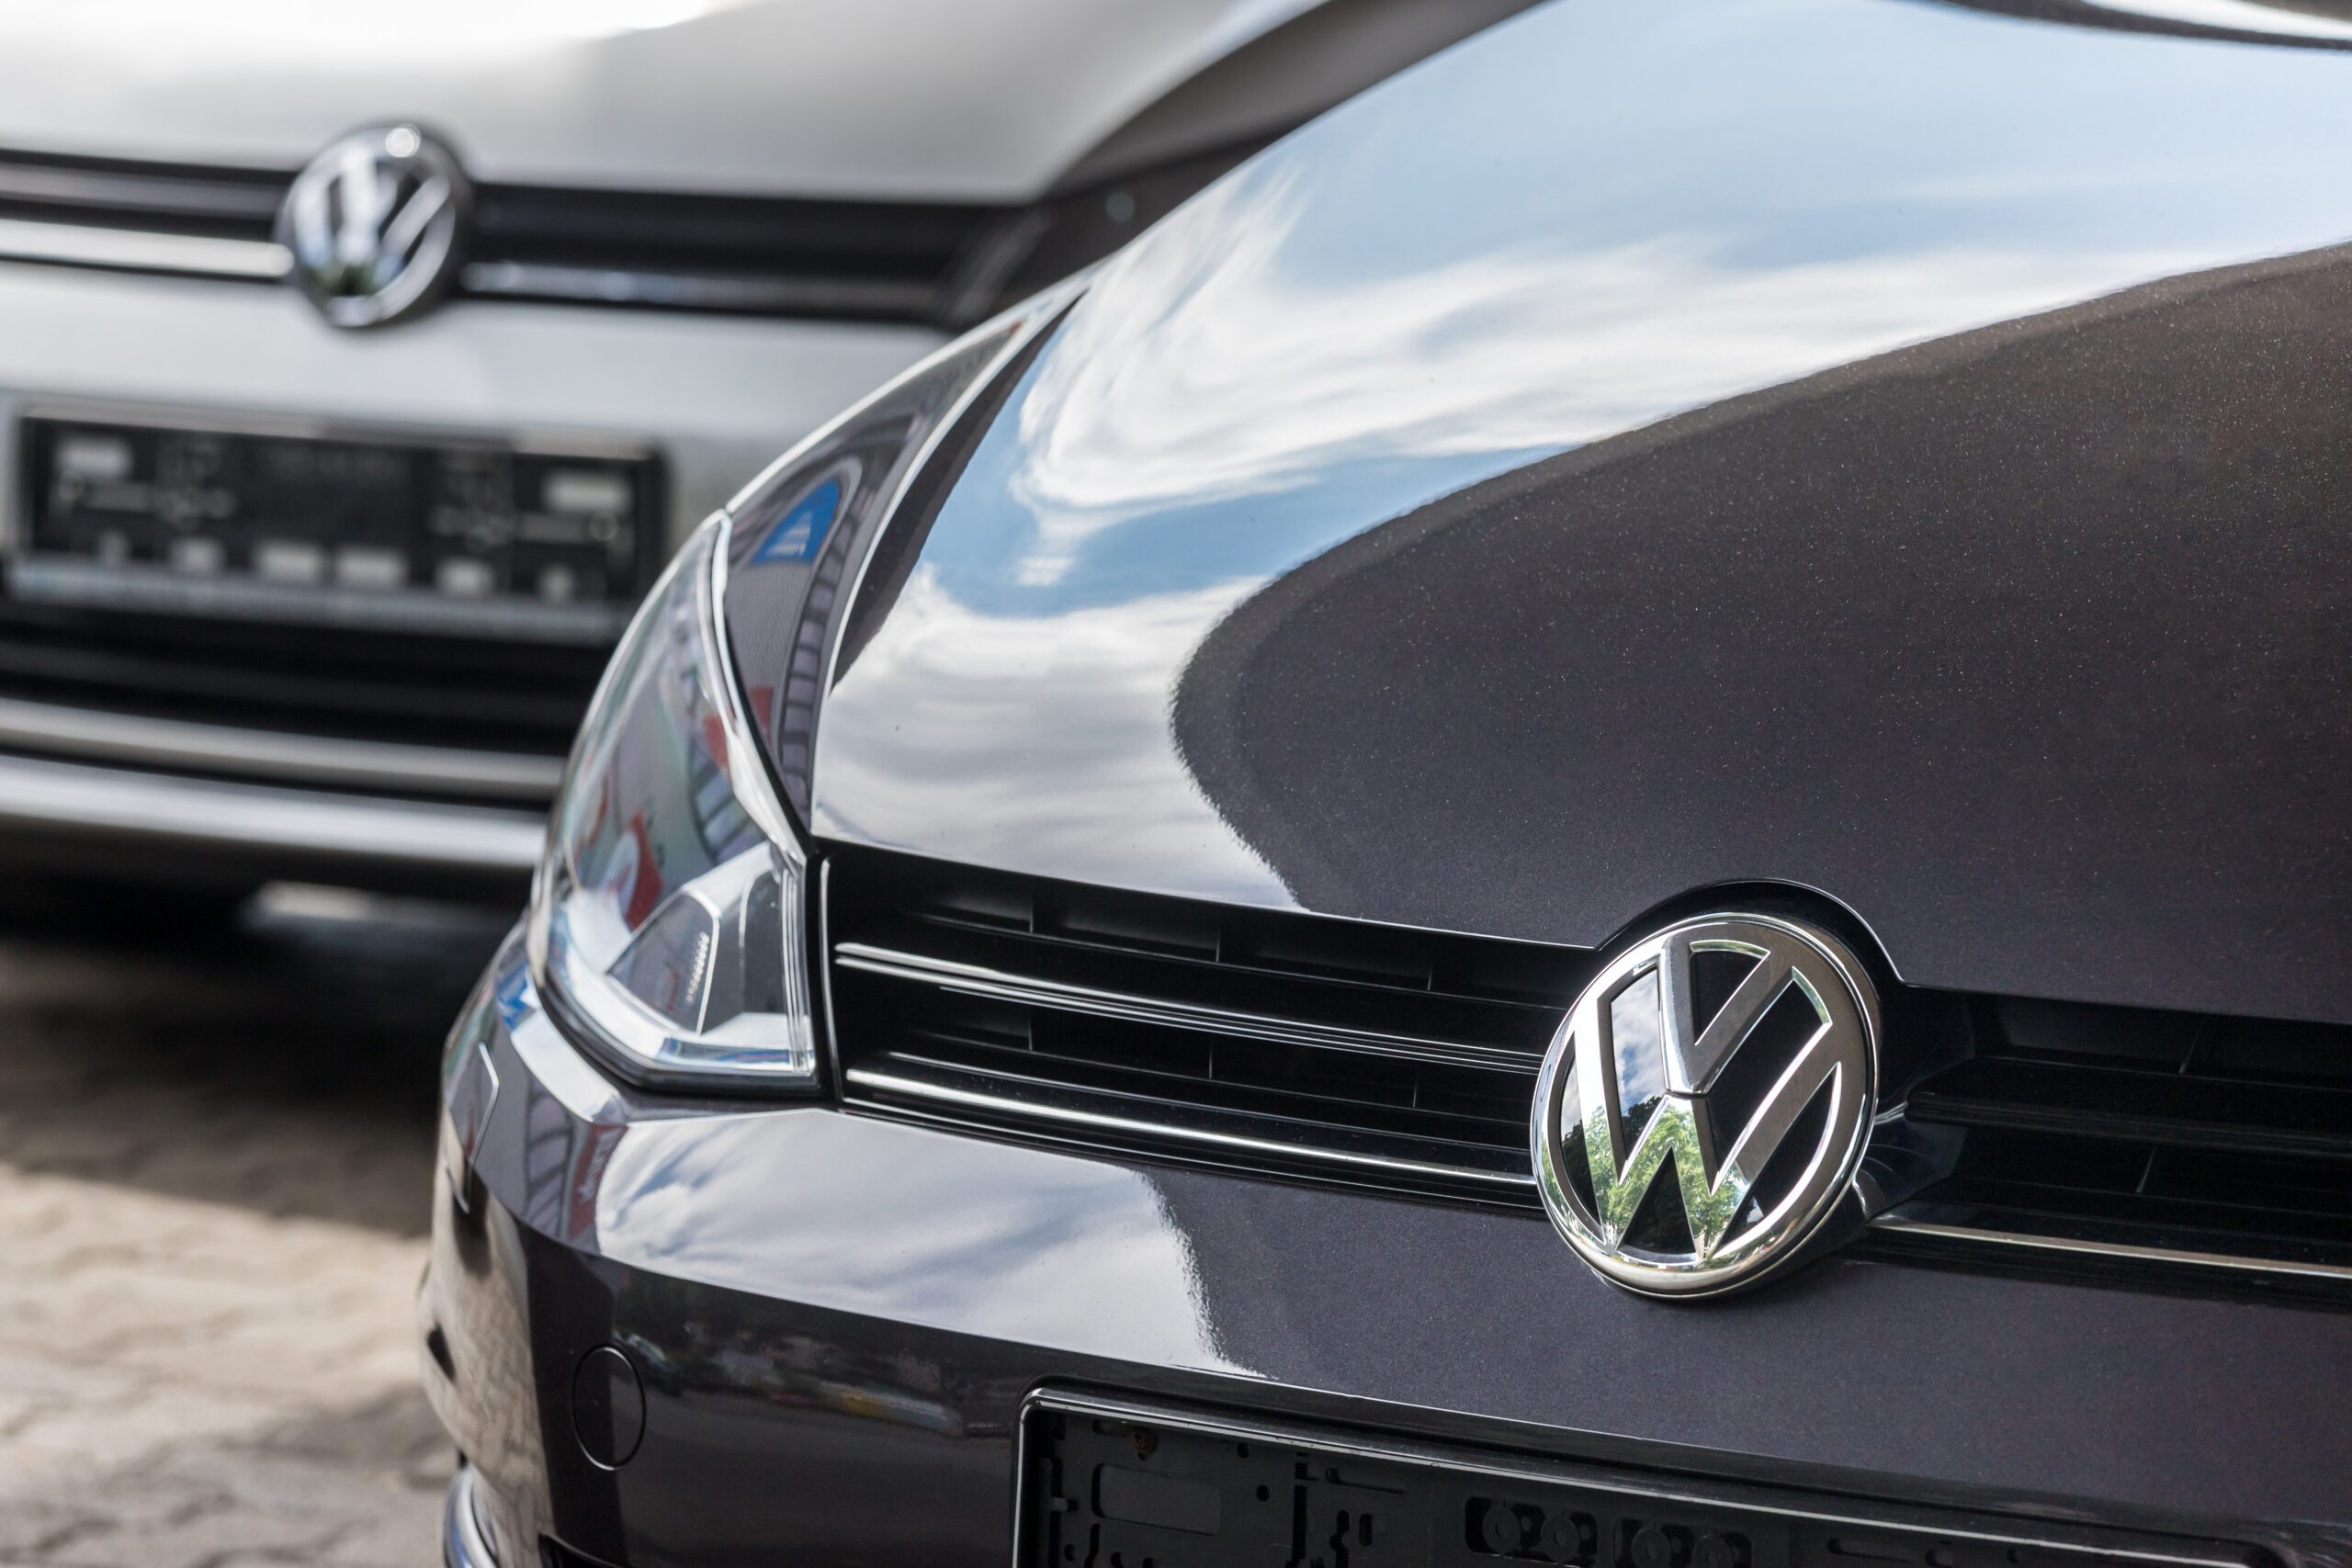 A class action lawsuit alleges certain Volkswagen models have a wiring harness defect